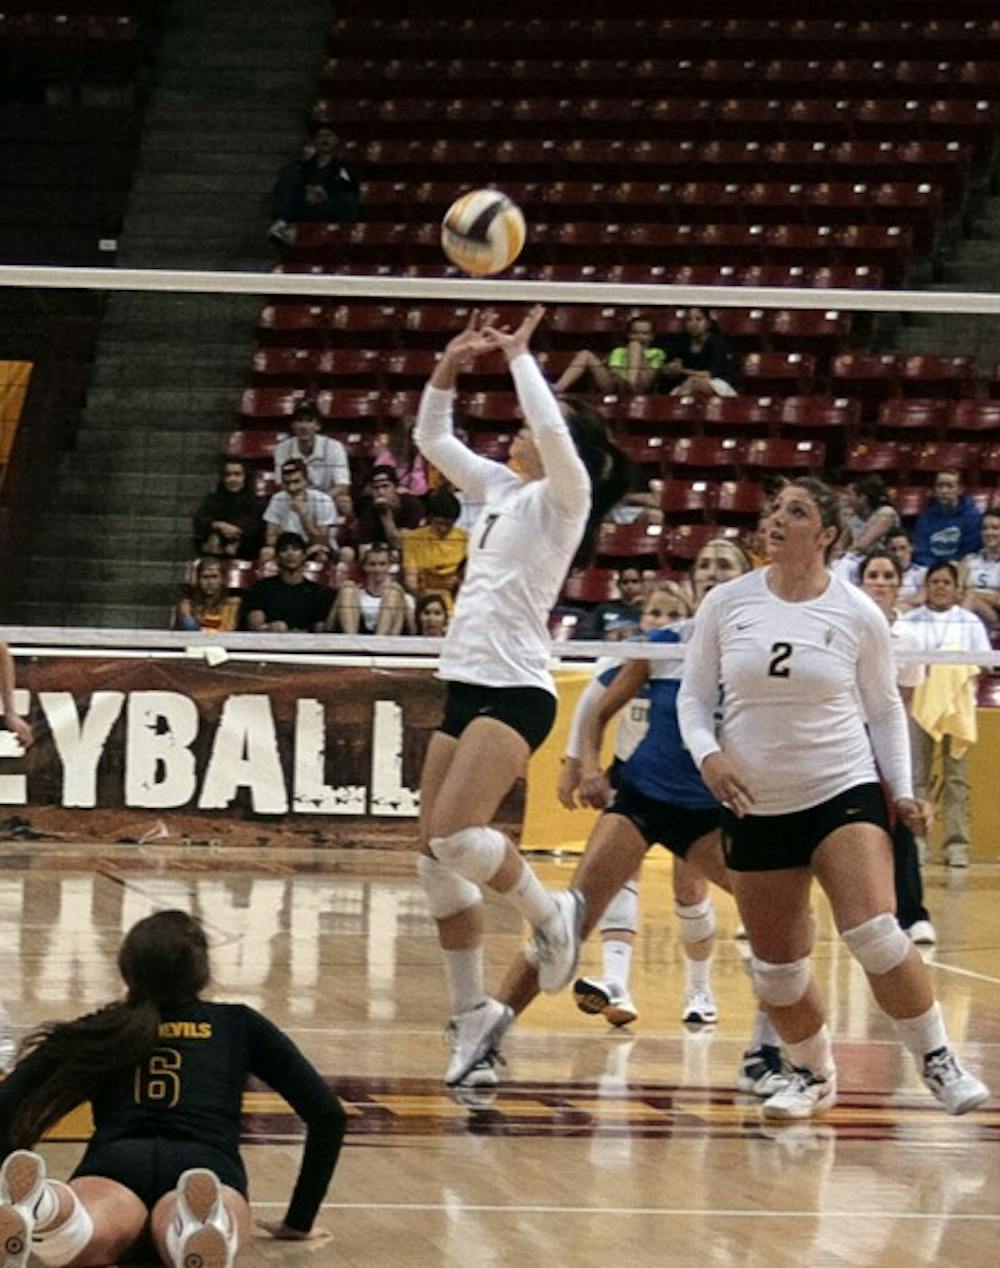 Senior setter Shannan McCready sets the ball in a home game in the 2011 season. (Photo by Michaela Mader)